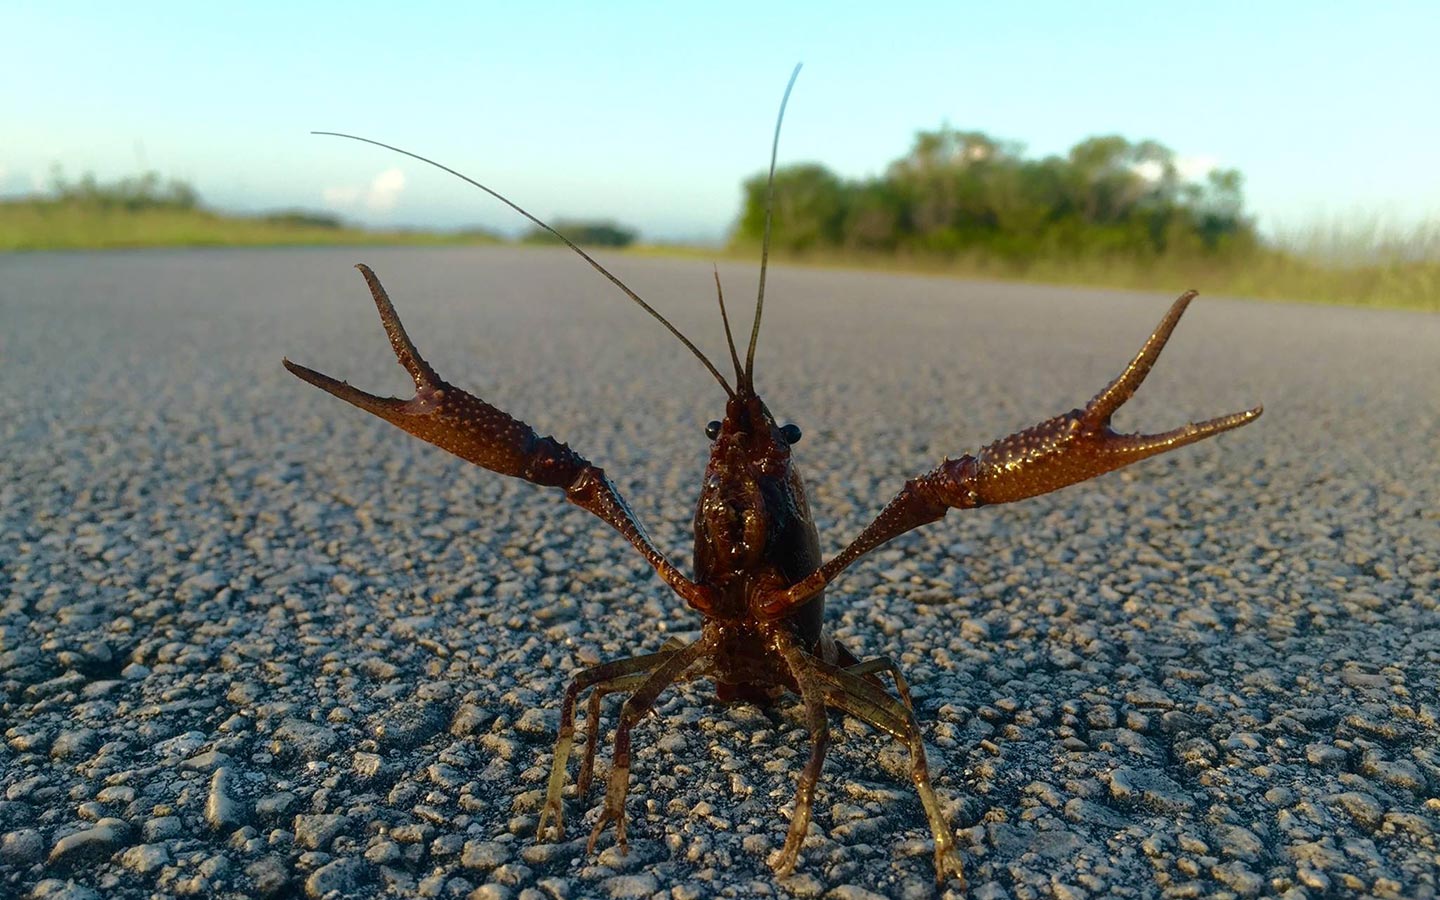 A Crawdaddy anxiously defends itself in the Everglades